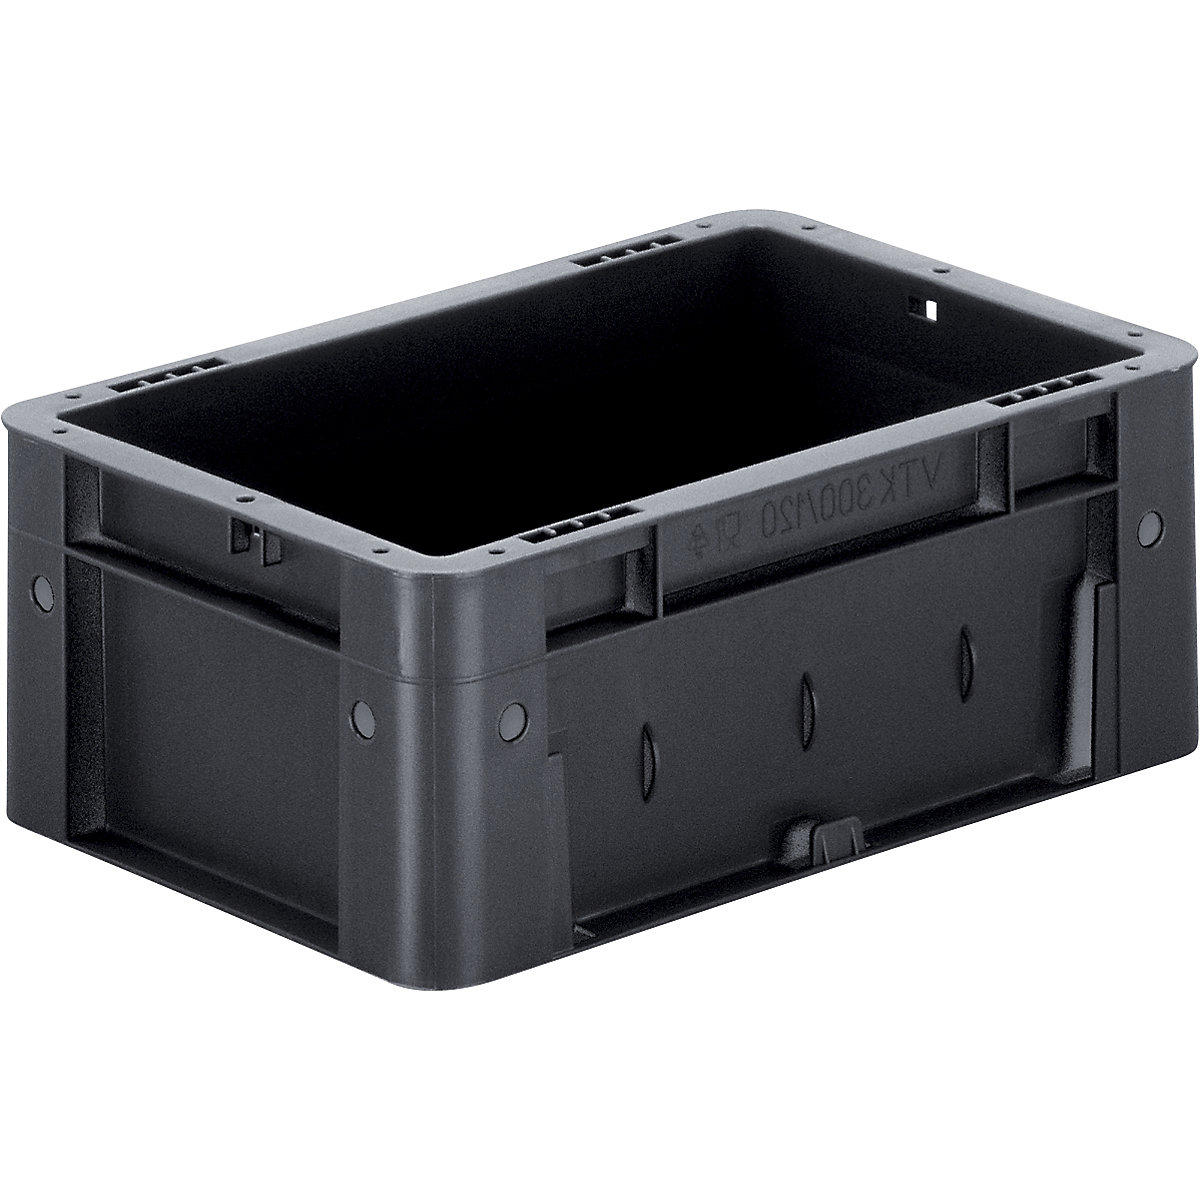 ESD heavy duty EURO-size container, made of polypropylene, LxWxH 300 x 200 x 110 mm, pack of 8-6